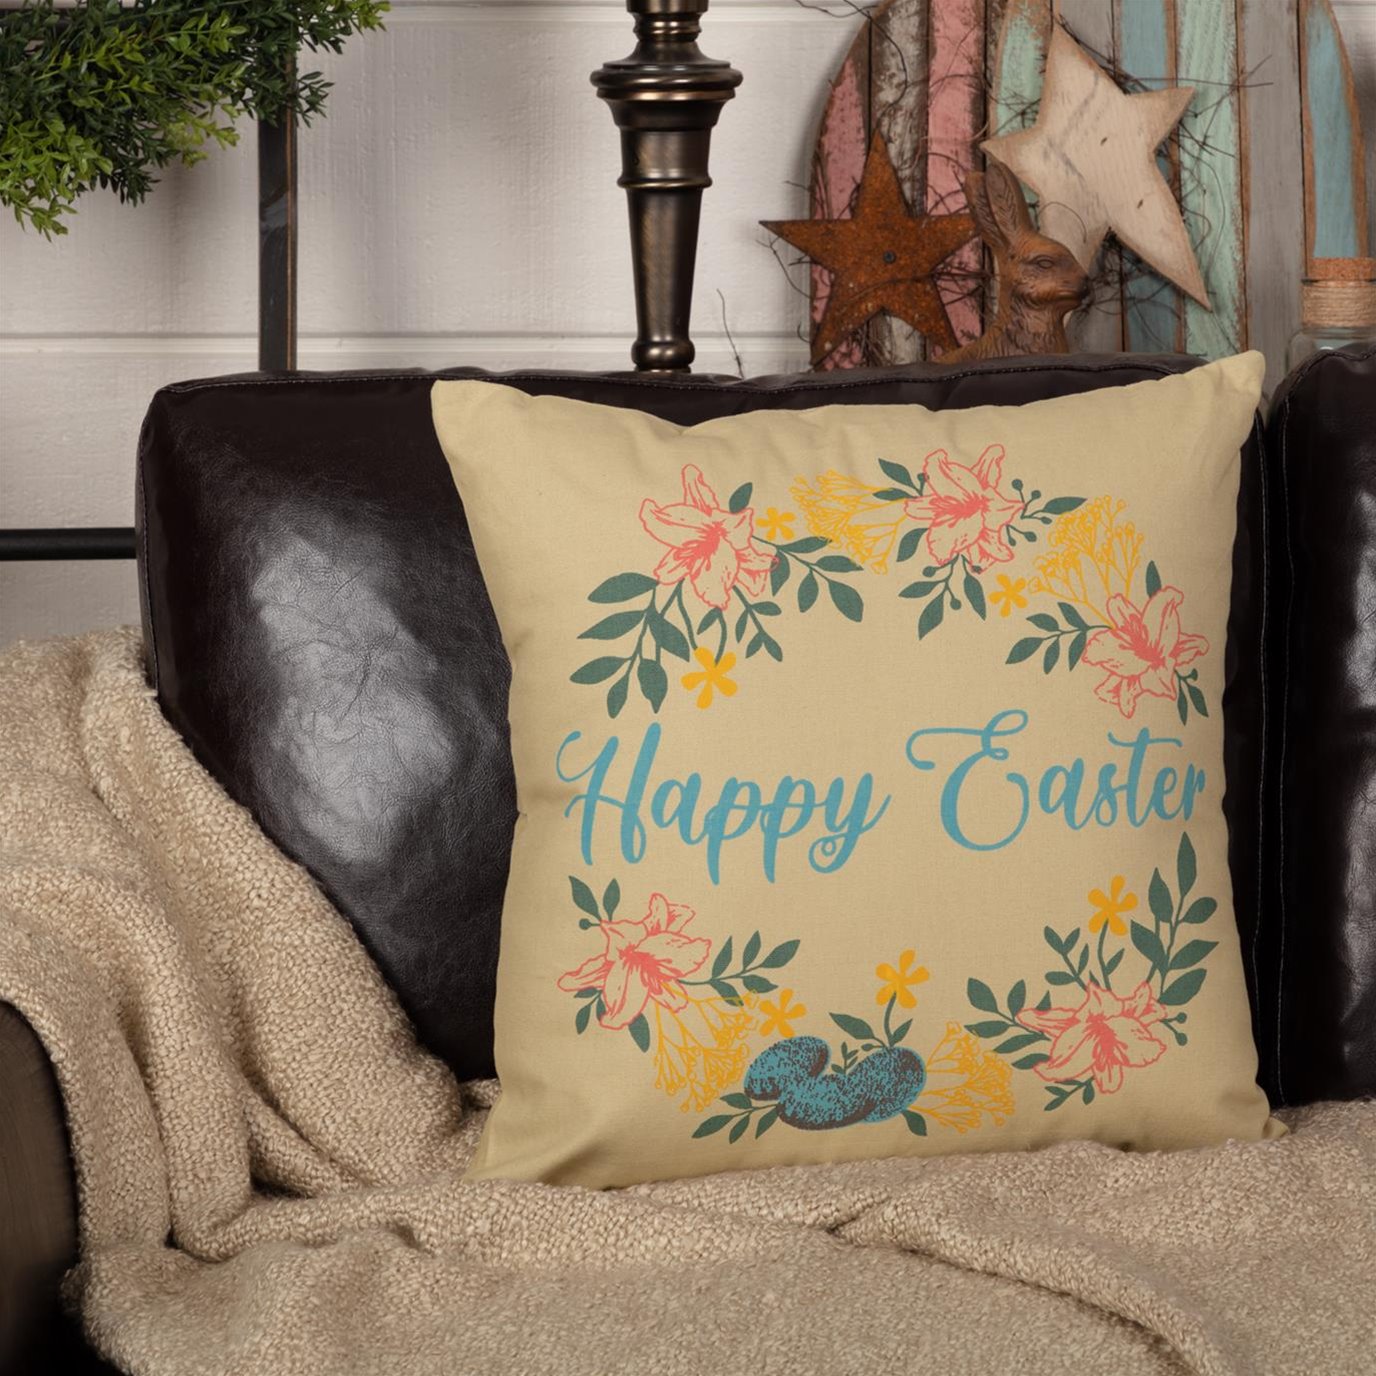 Sawyer Mill Happy Easter Wreath Pillow 18x18